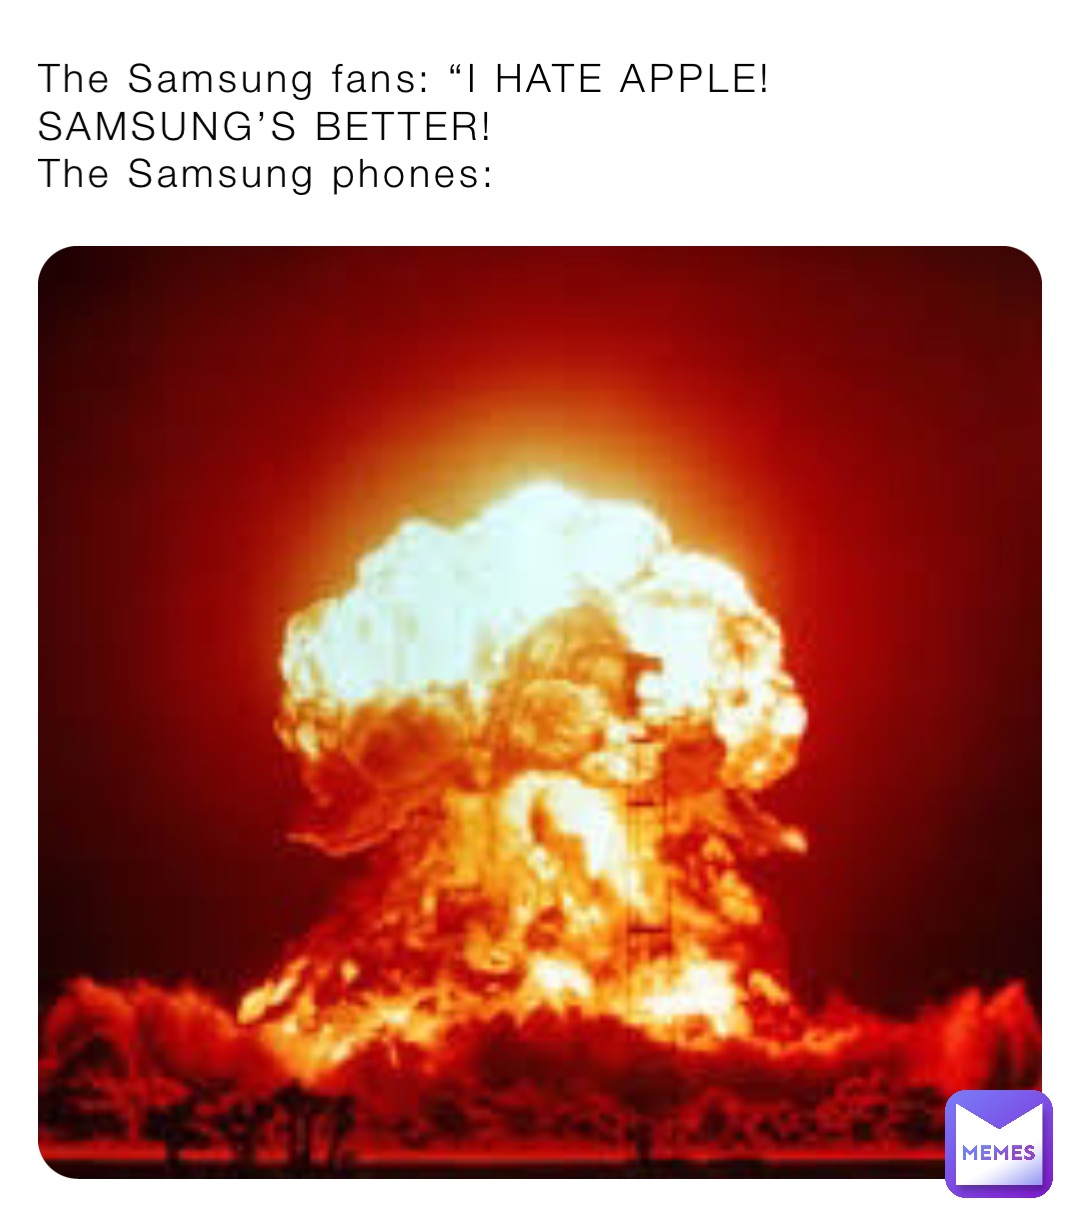 The Samsung fans: “I HATE APPLE! SAMSUNG’S BETTER!
The Samsung phones: